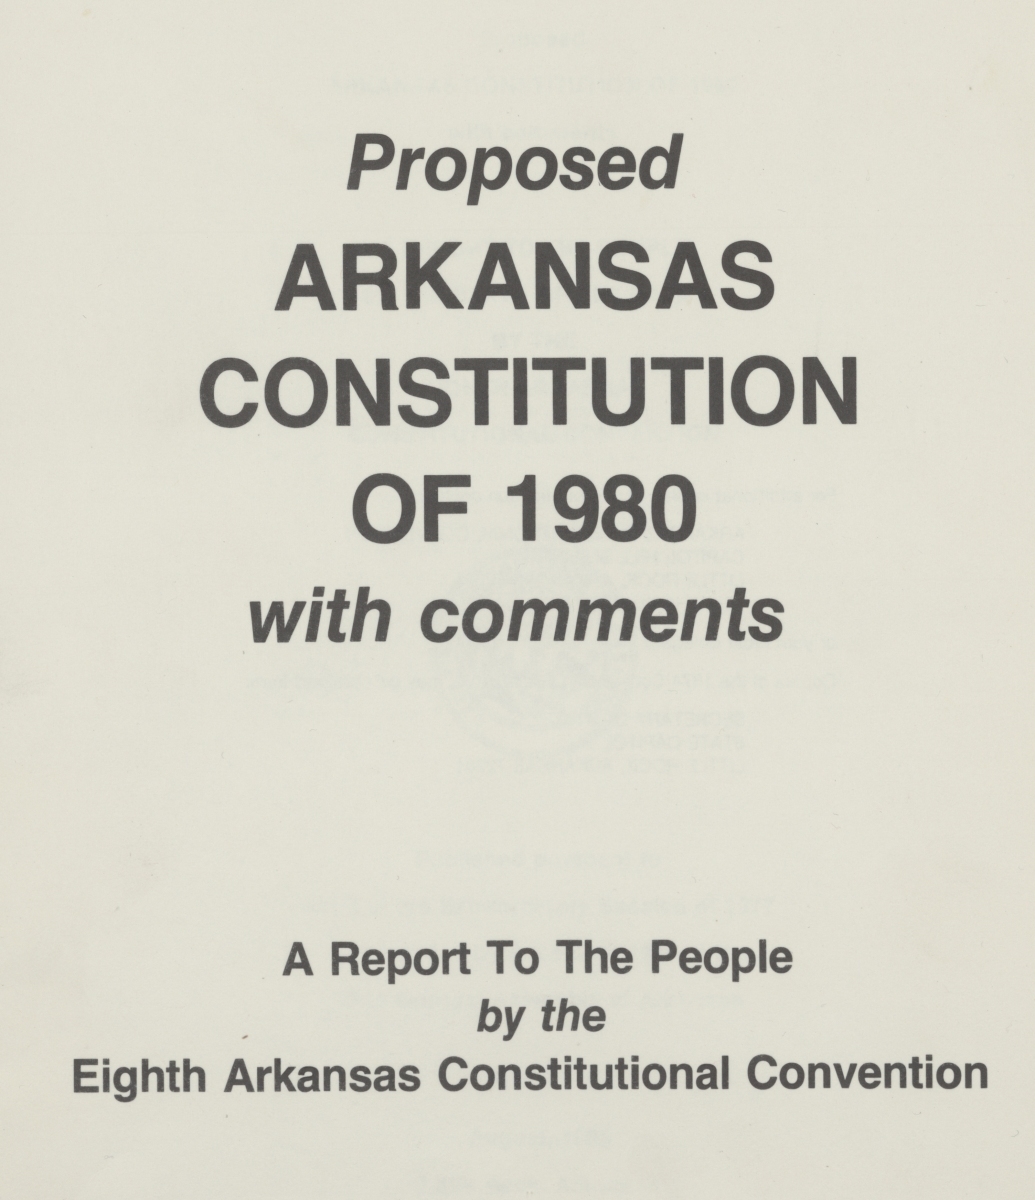 First page of the "Proposed Arkansas Constitution of 1980 with comments"